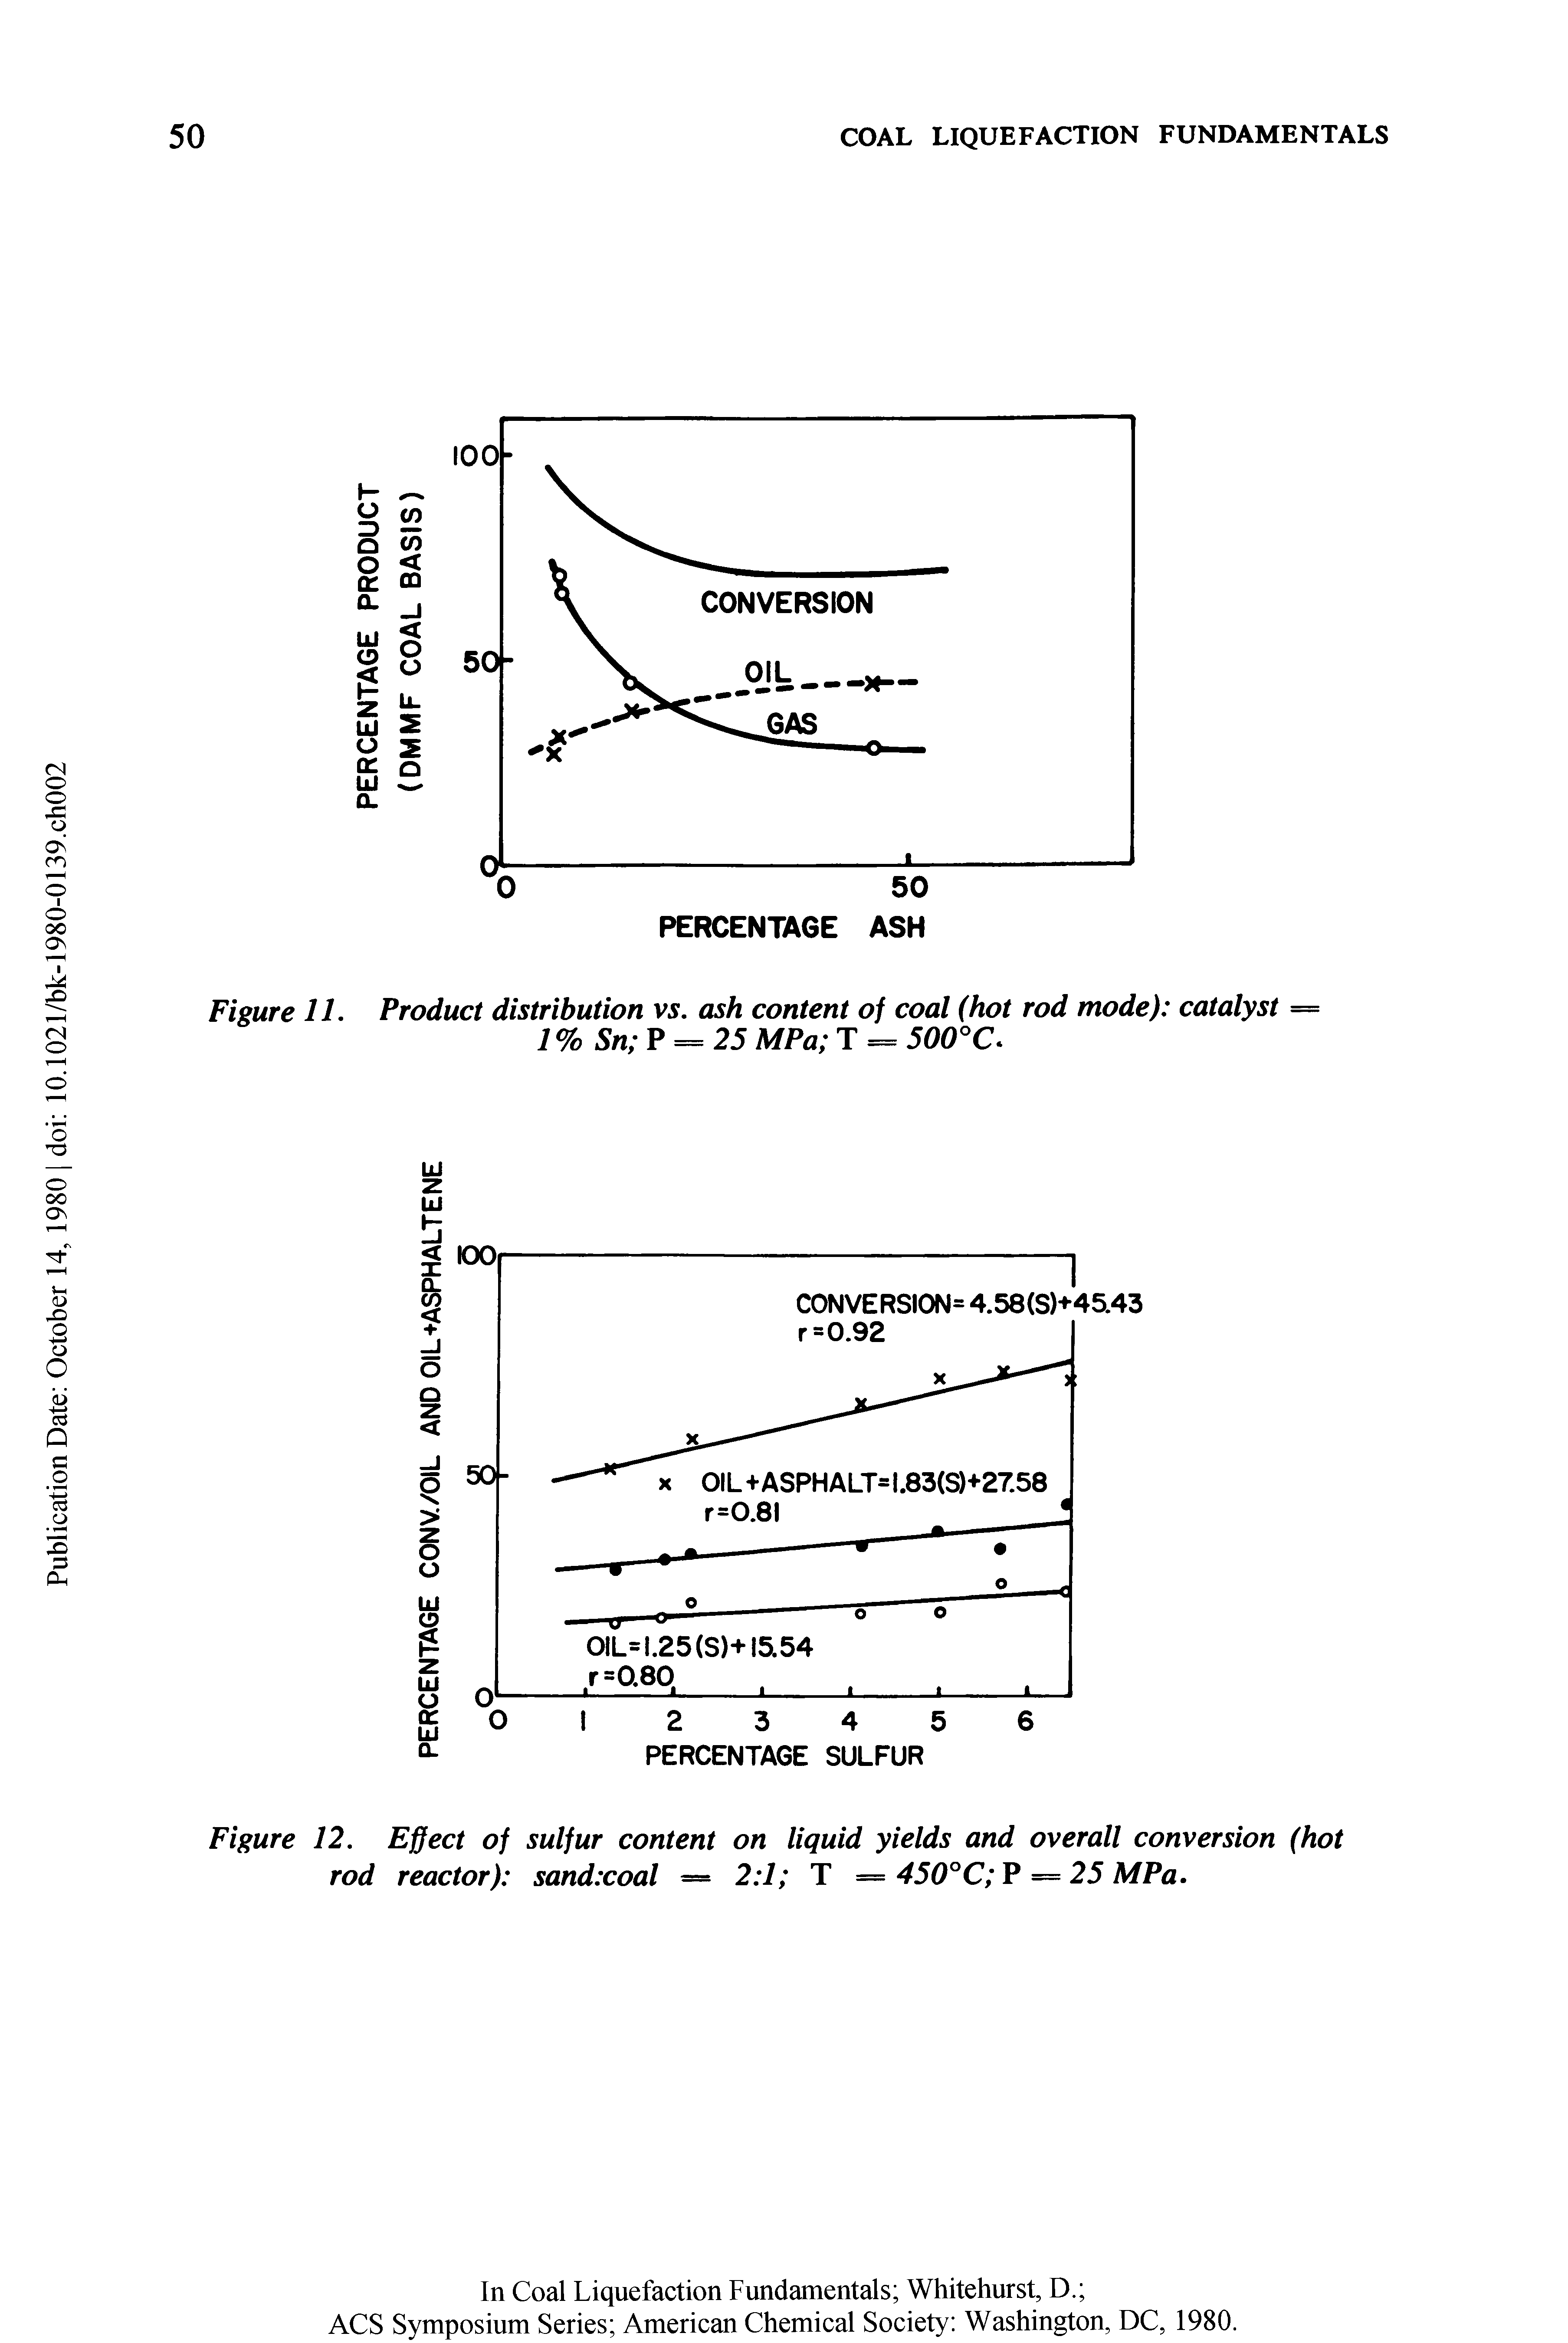 Figure 12. Effect of sulfur content on liquid yields and overall conversion (hot rod reactor) sand coal = 2 1 T = 450°C P = 25 MPa.